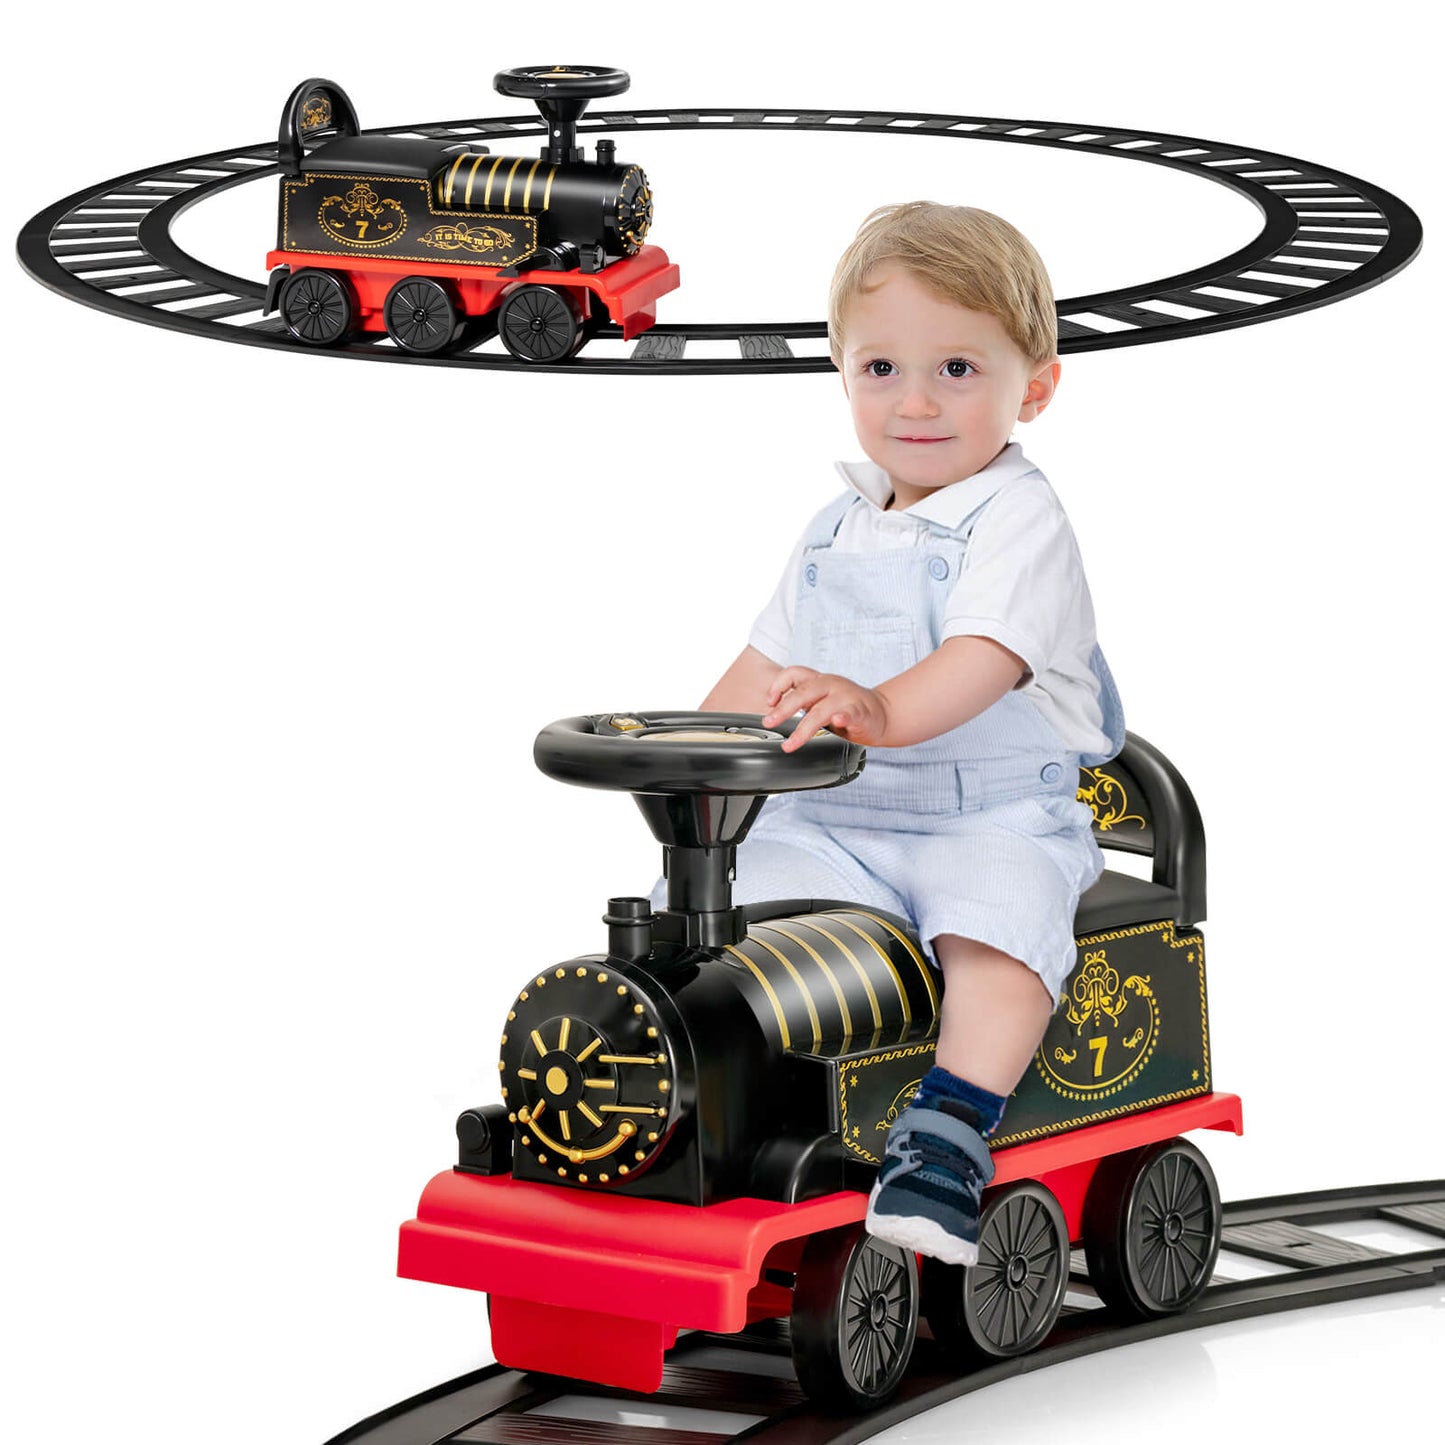 6V Electric Kids Ride On Car Toy Train with 16 Pieces Tracks, Black - Gallery Canada